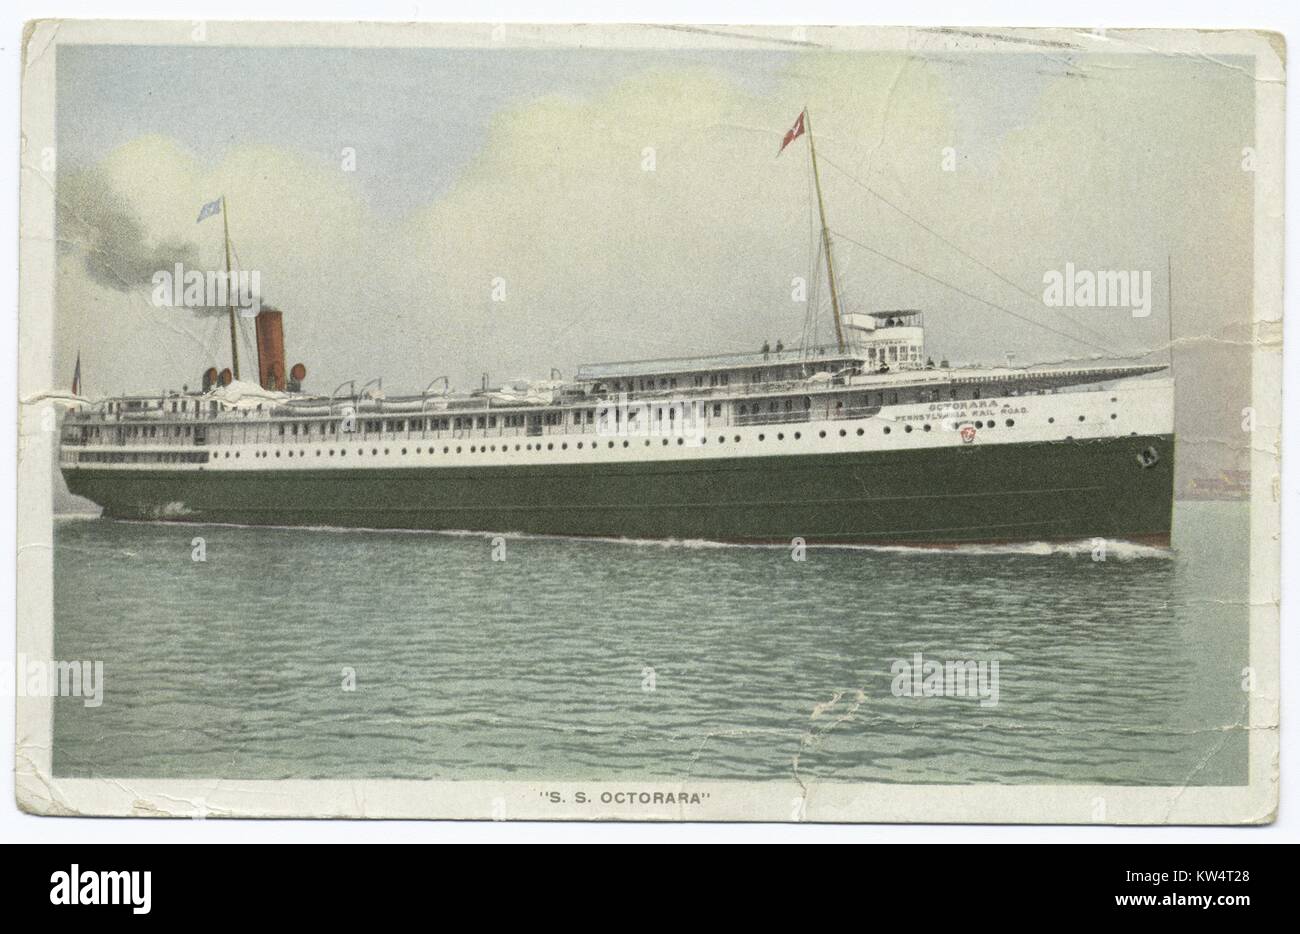 SS' Octorara of anchor line, the great lakes marine division of the Pennsylvania railroad, 1914. From the New York Public Library. () Stock Photo